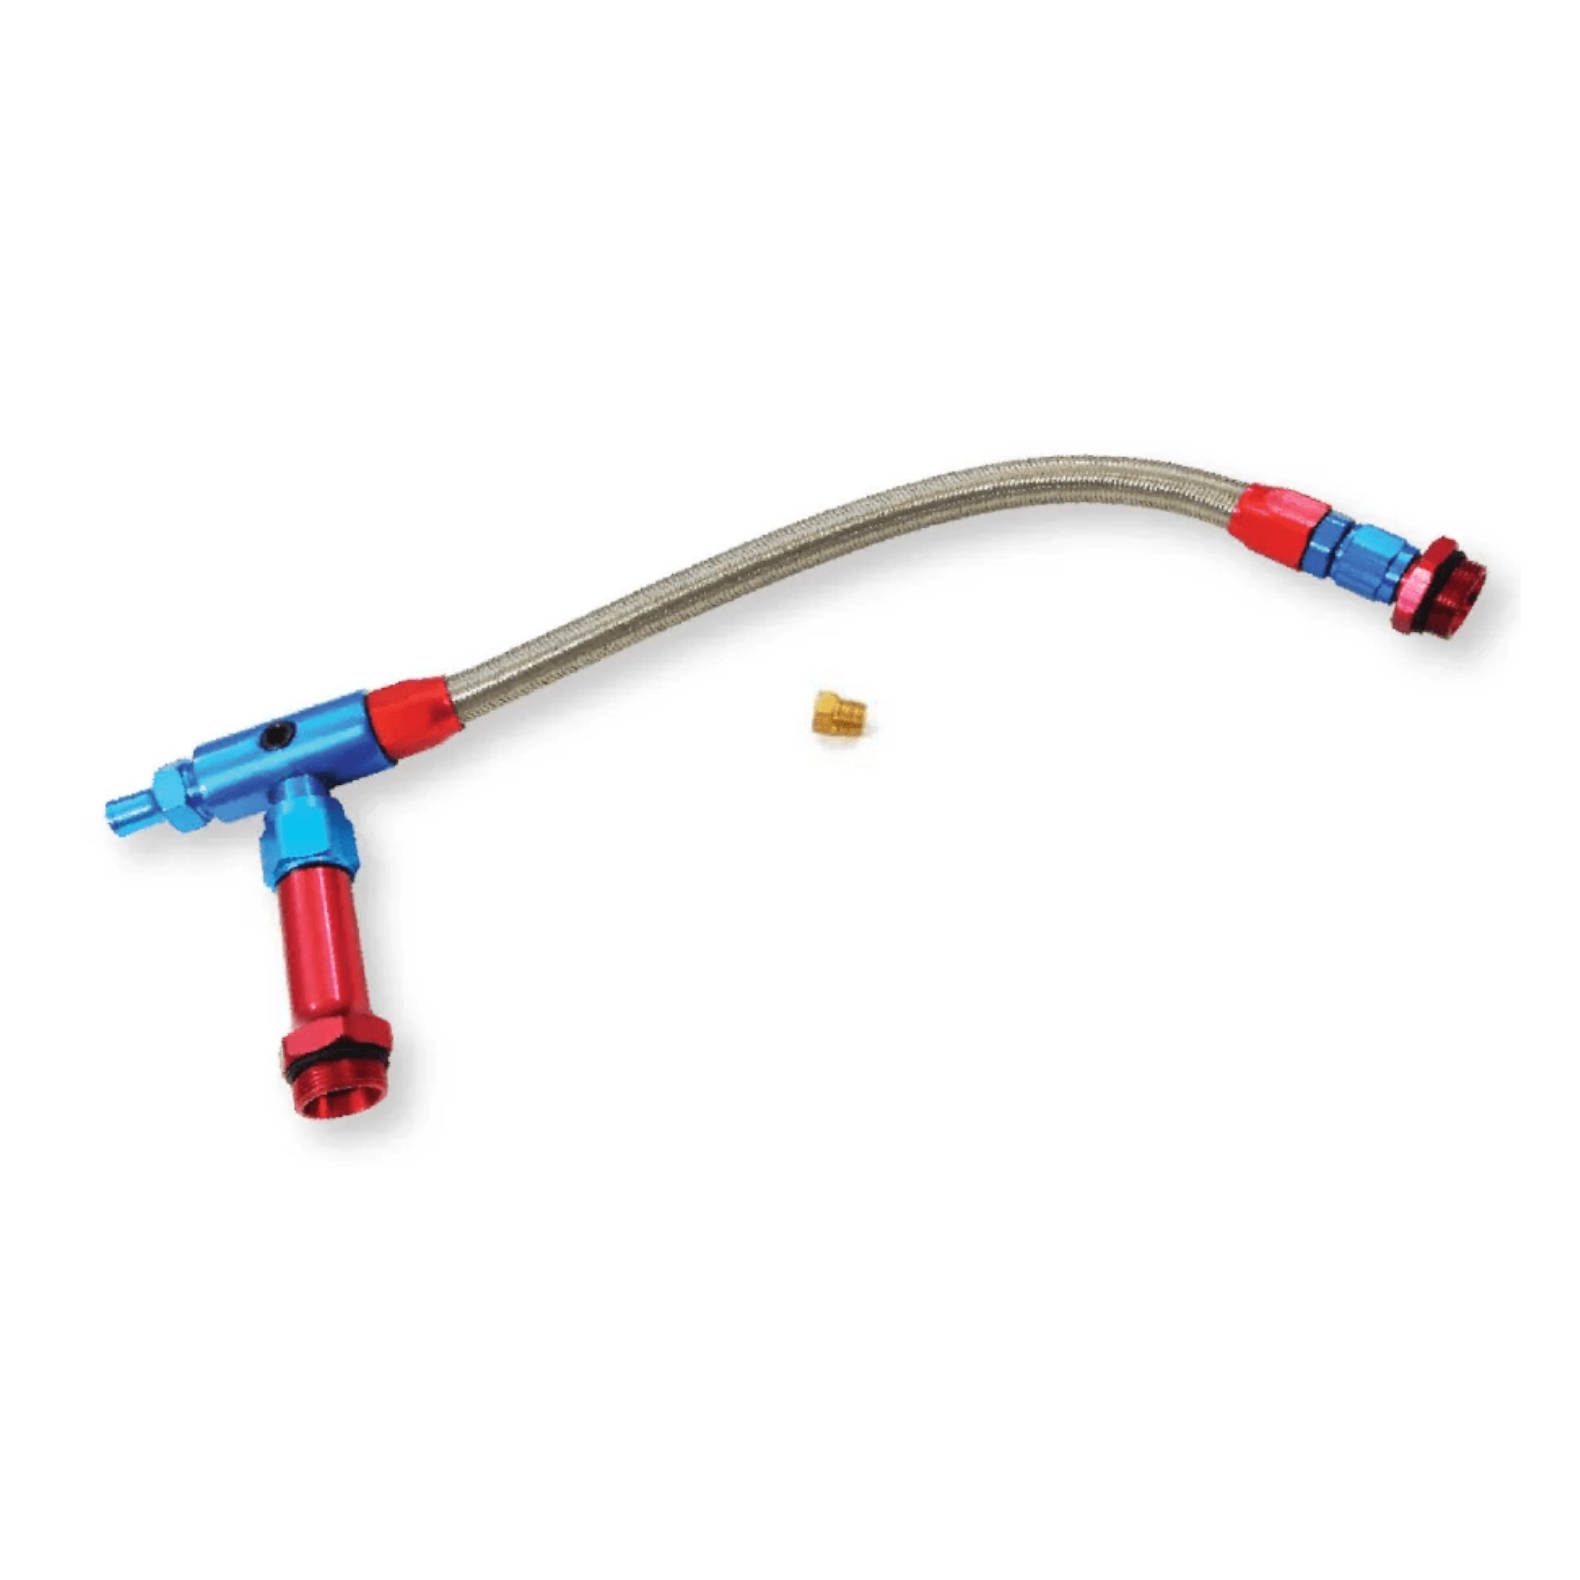 Steel Braided Fuel Line With Blue & Red Anodized Fittings - For